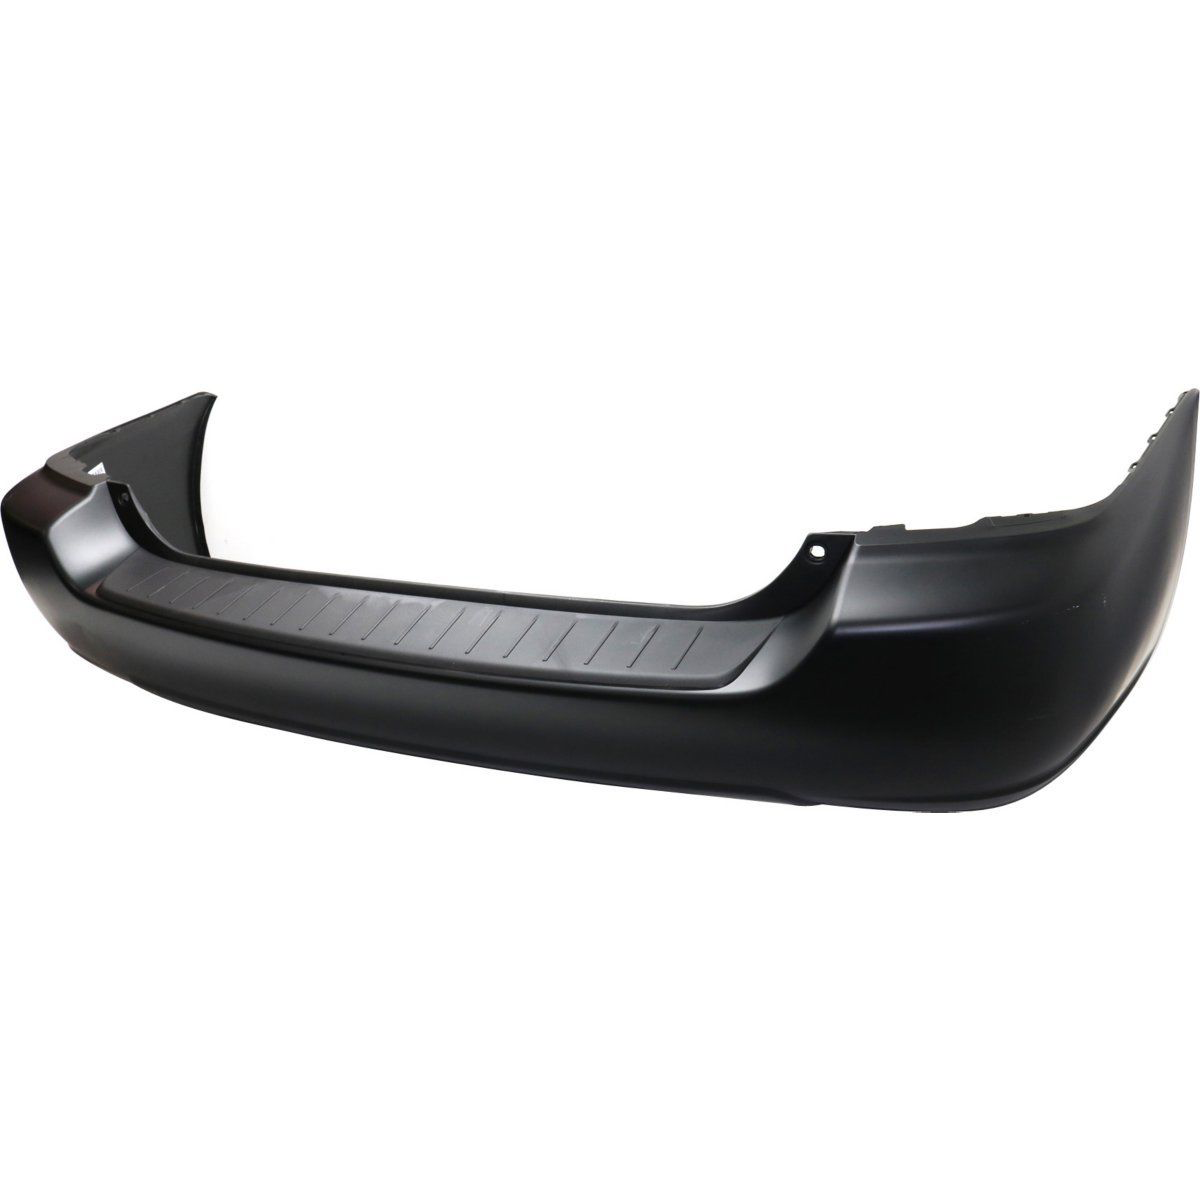 2004-2007 TOYOTA HIGHLANDER Rear Bumper Cover Painted to Match